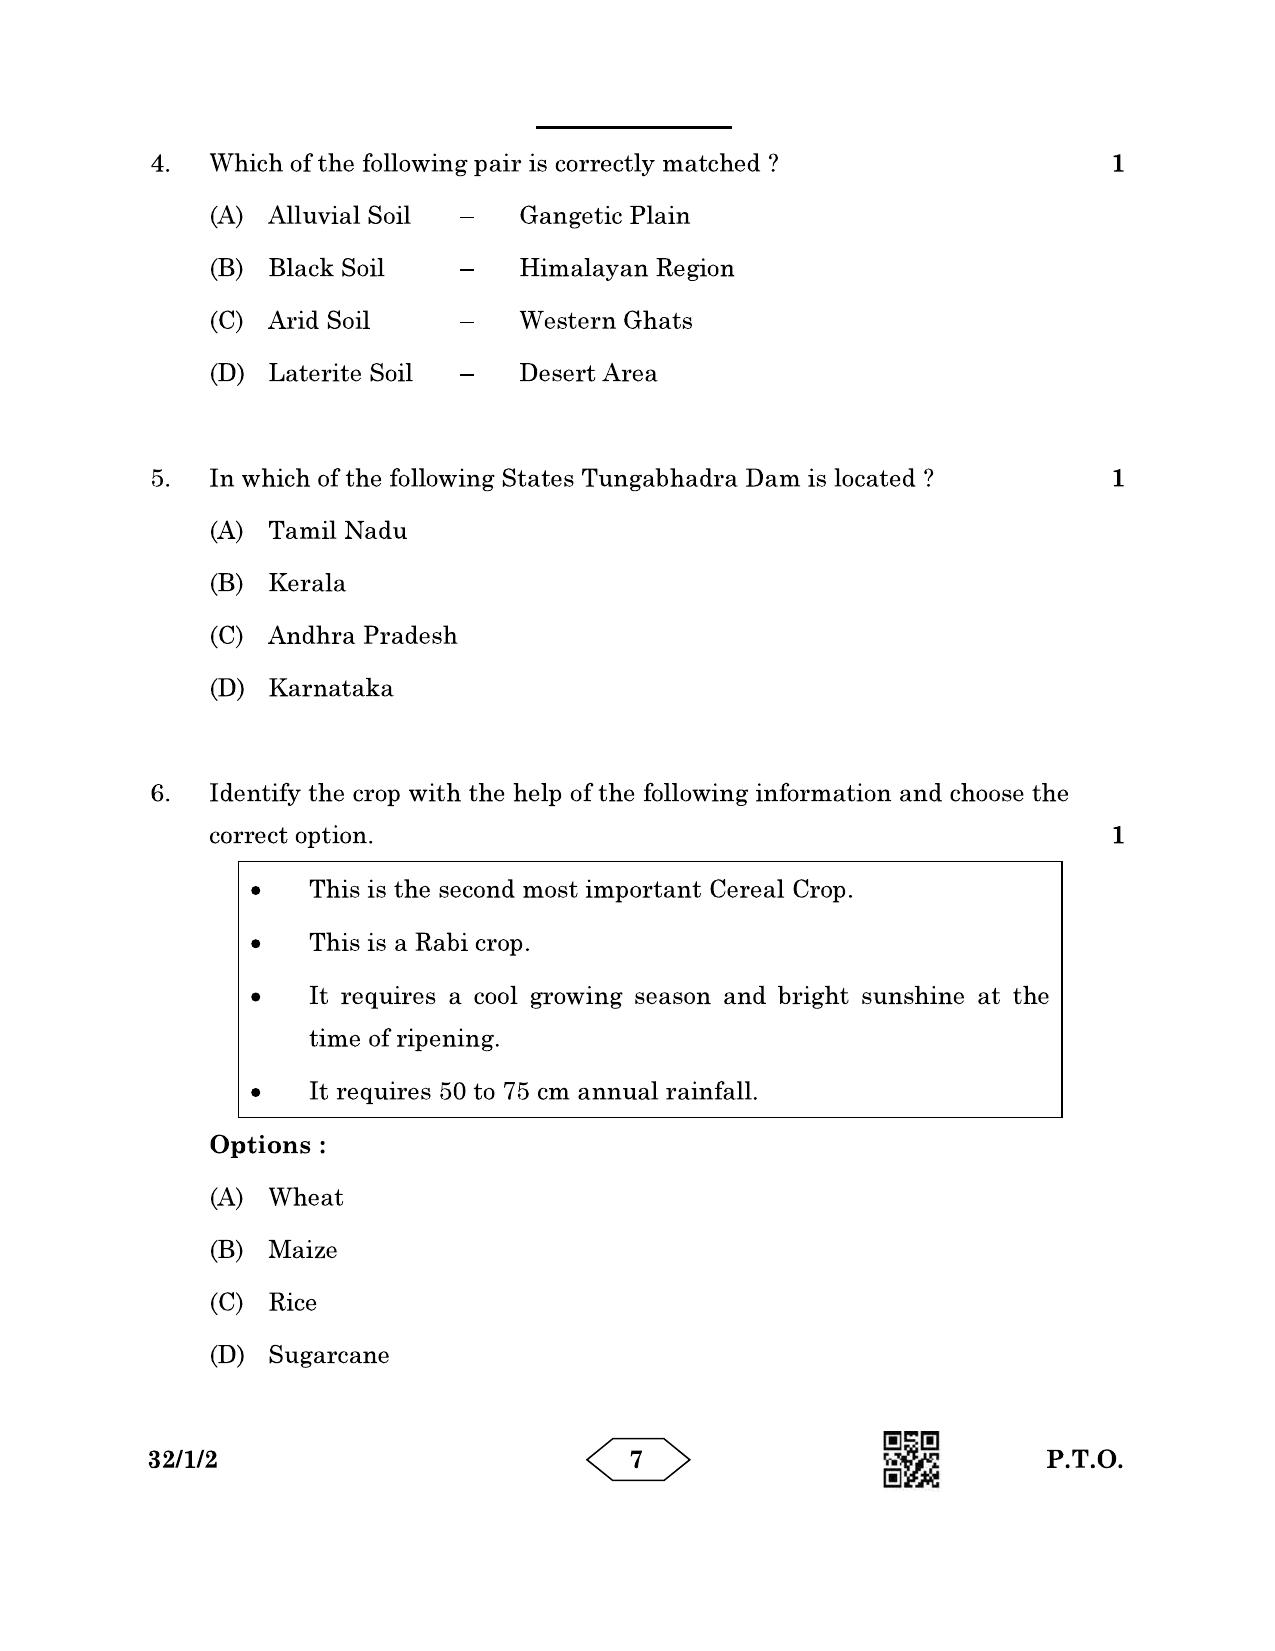 CBSE Class 10 32-1-2 Social Science 2023 Question Paper - Page 7